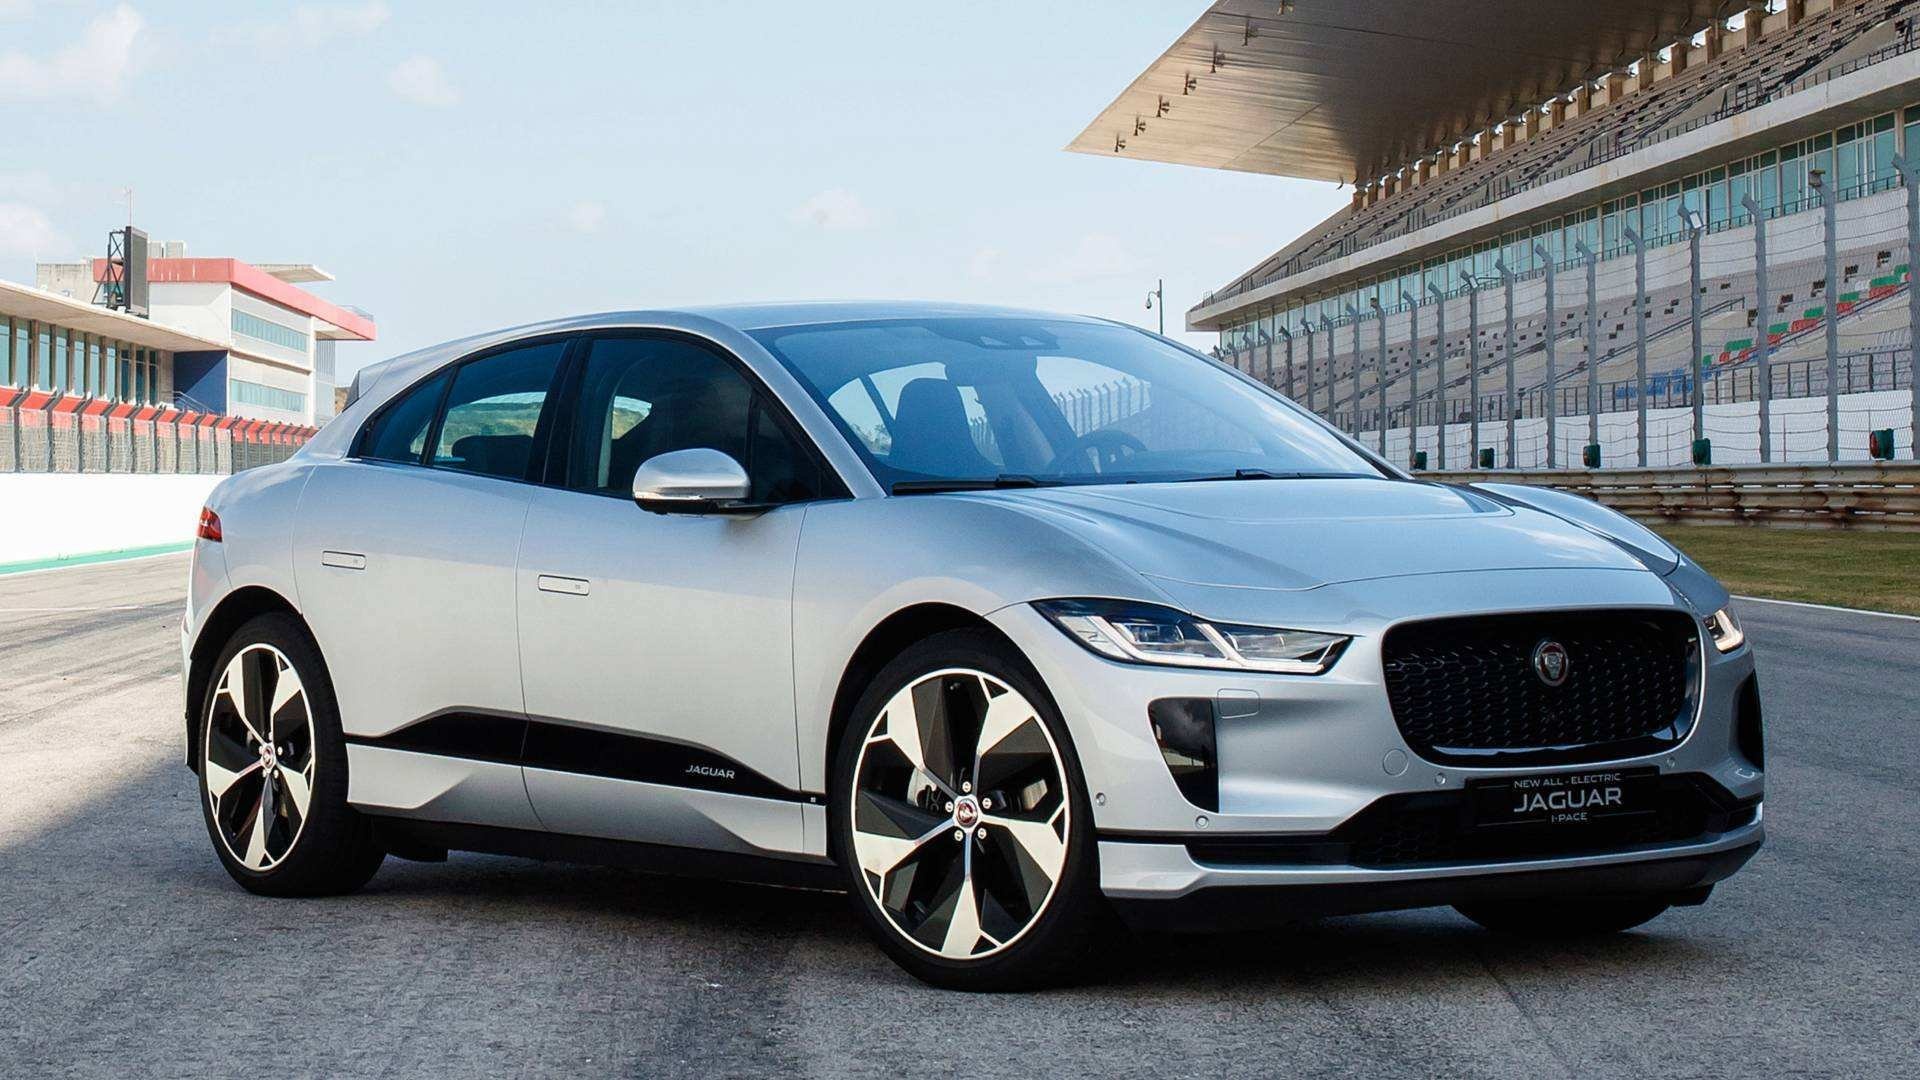 Jaguar I-PACE, Electric vehicle, Sporty design, Sustainable mobility, 1920x1080 Full HD Desktop